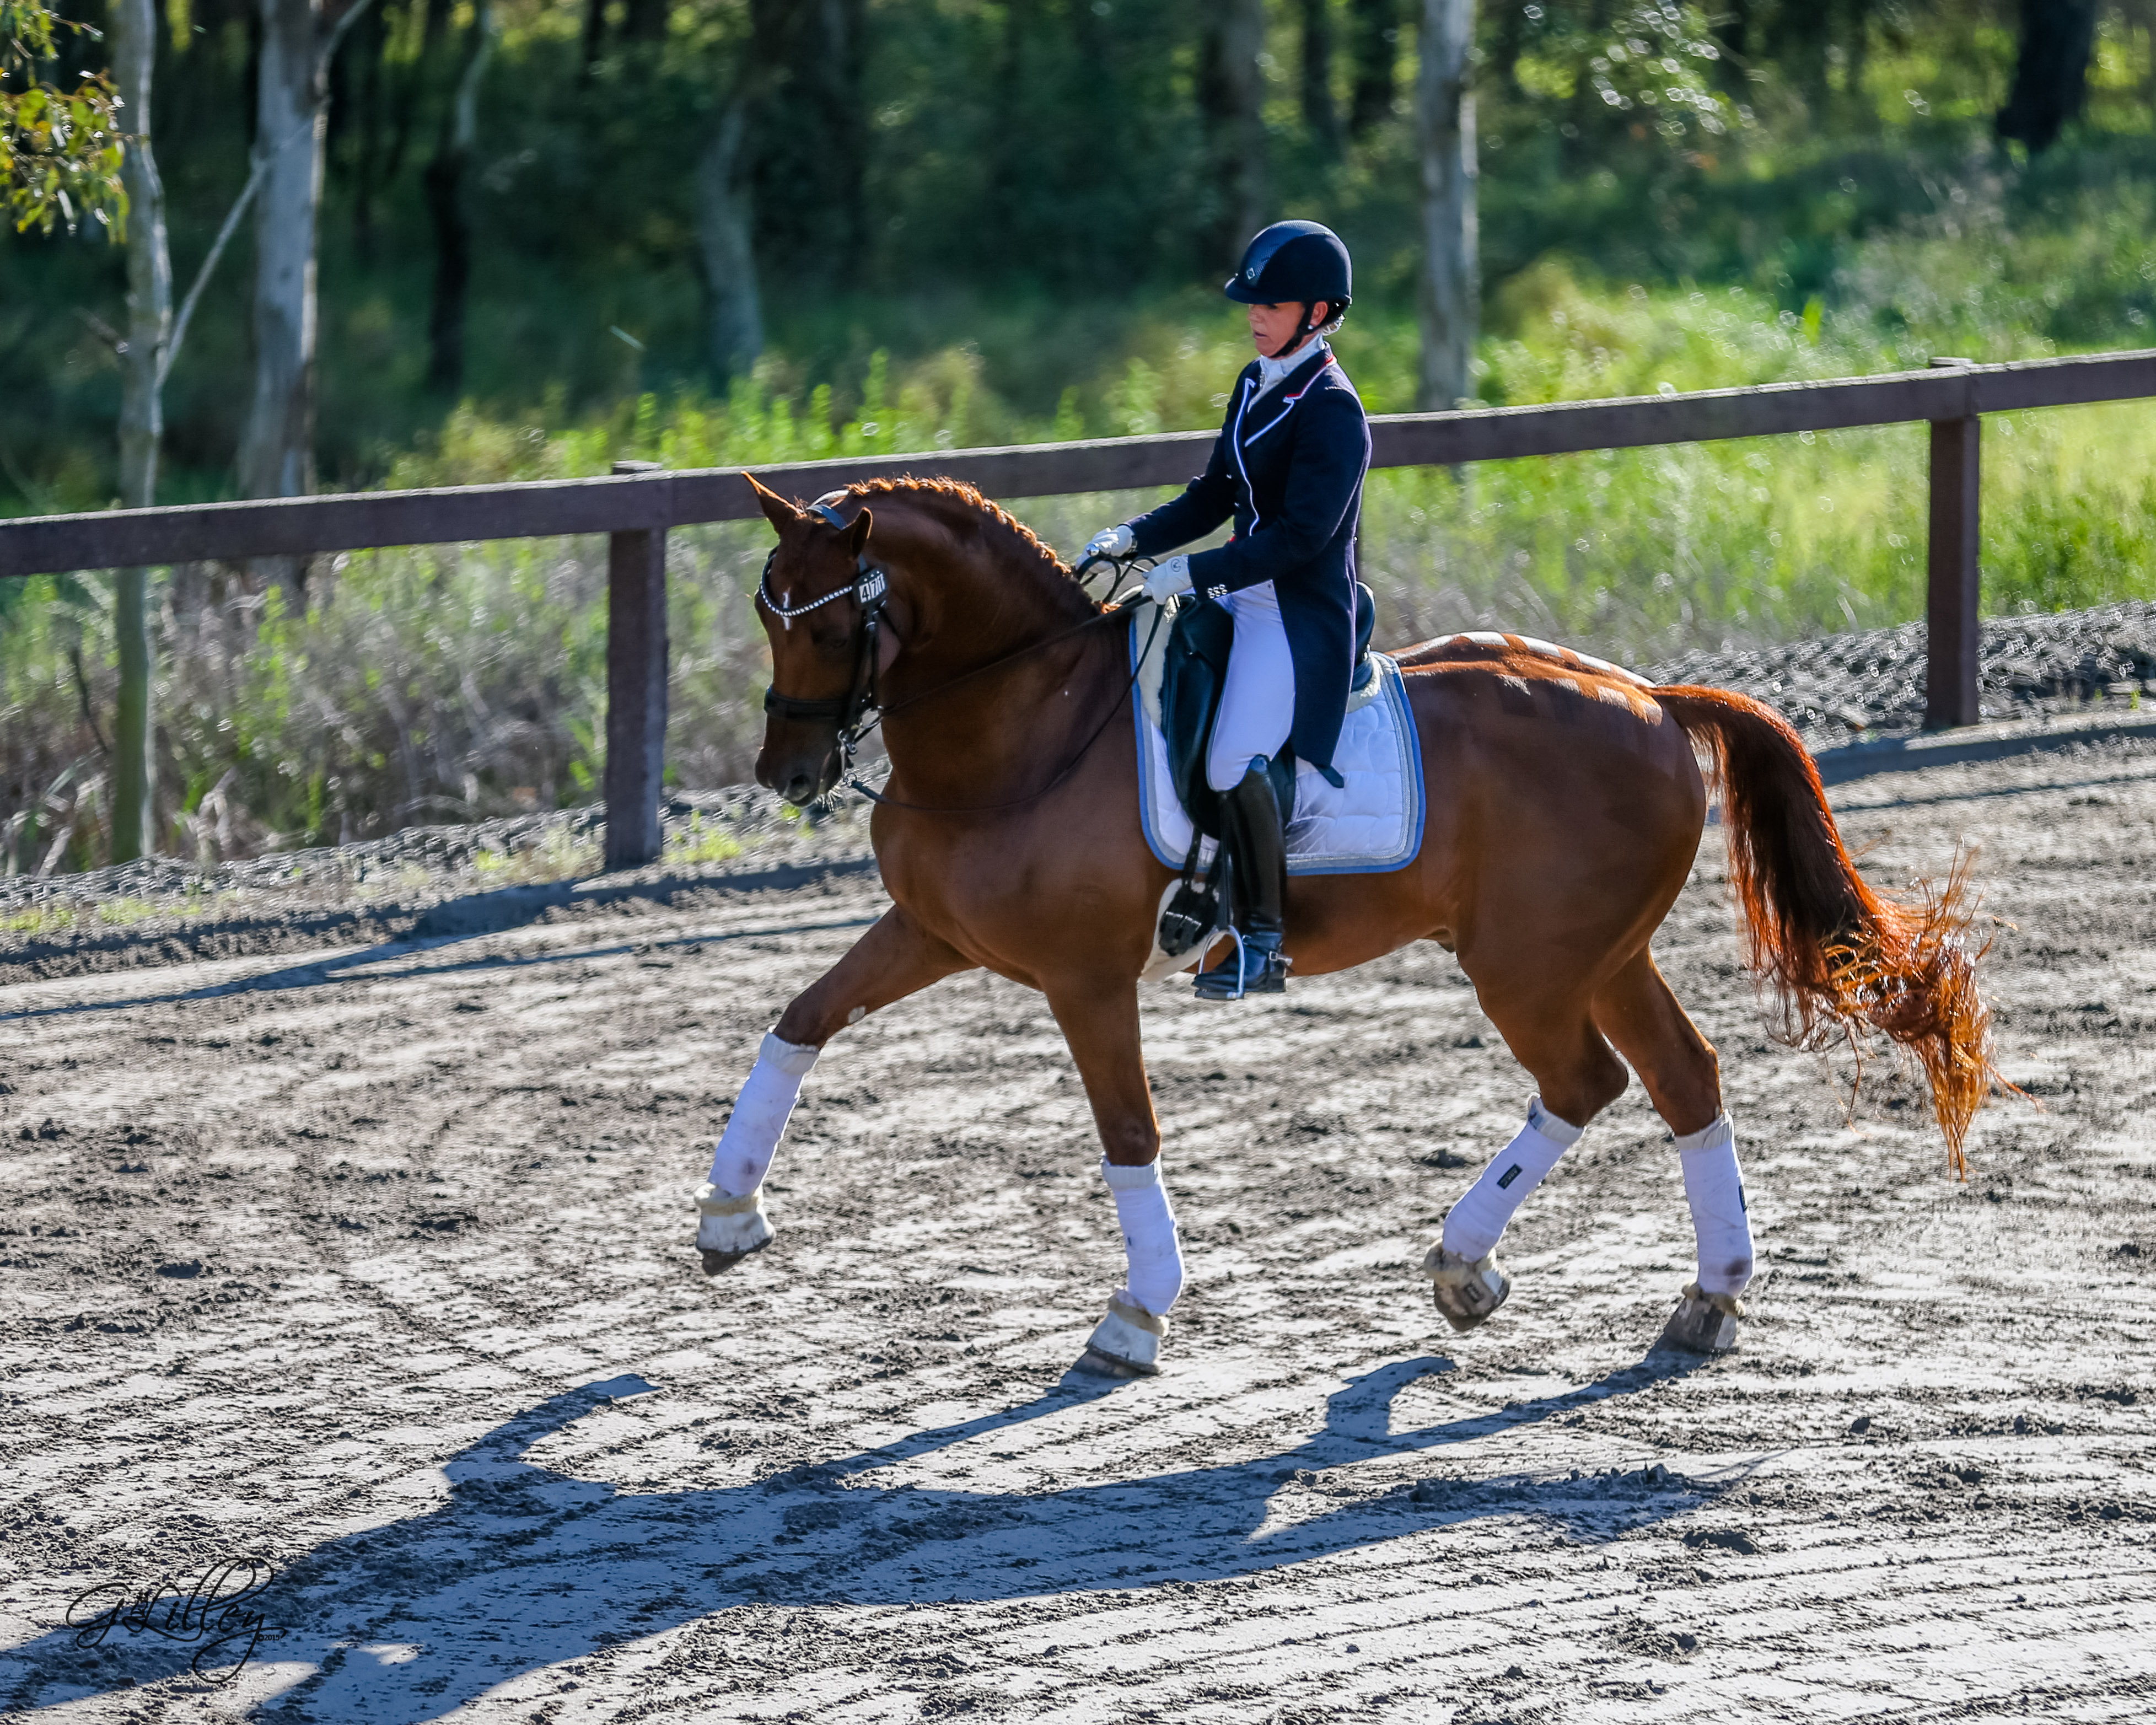 KEA Training Stables – Rochelle King-Andrews and Greg Andrews